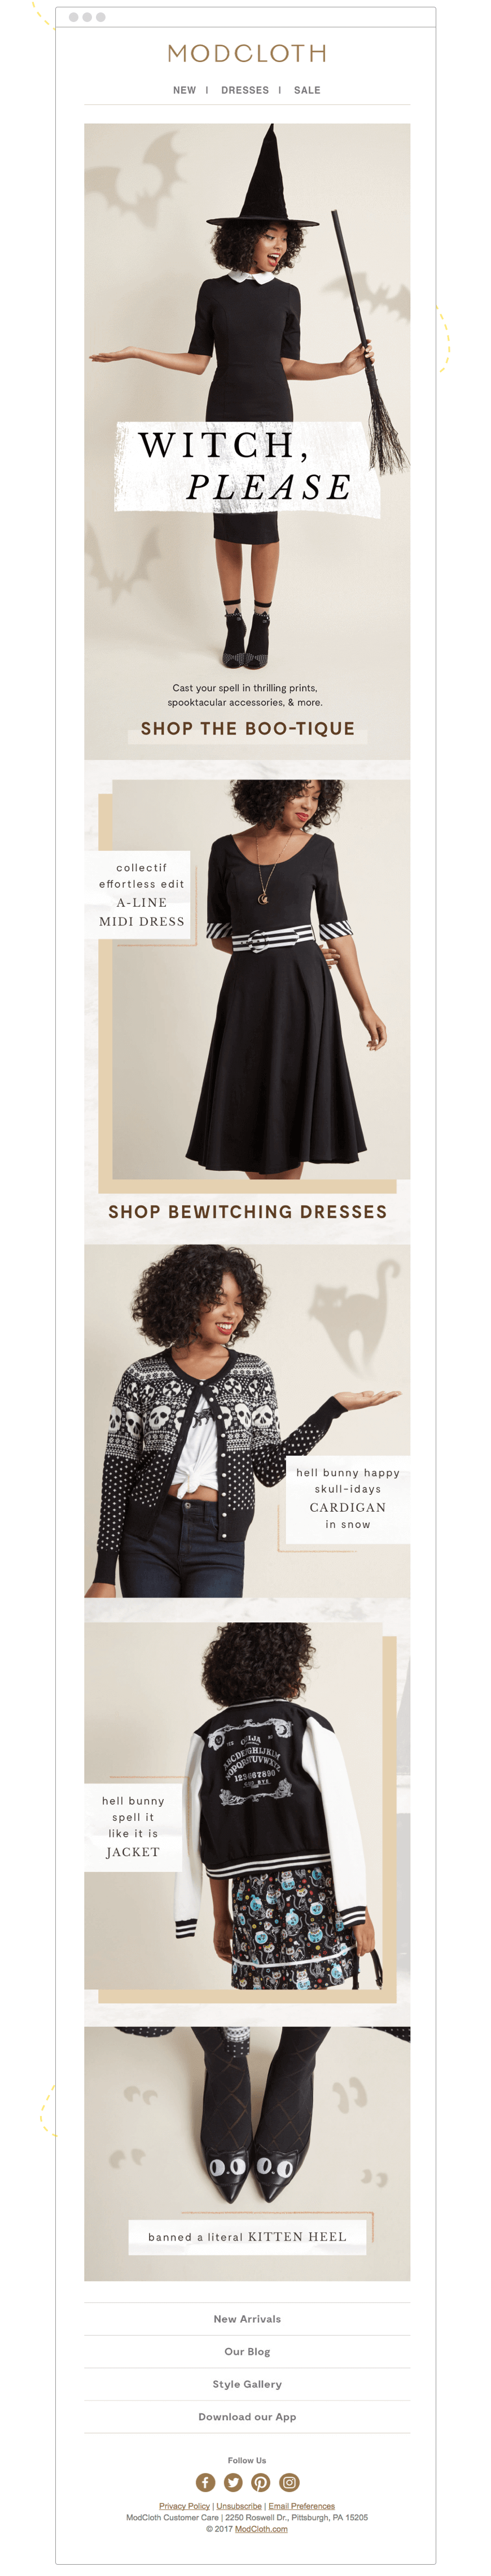 Modcloth_Halloween_Email_Campaign